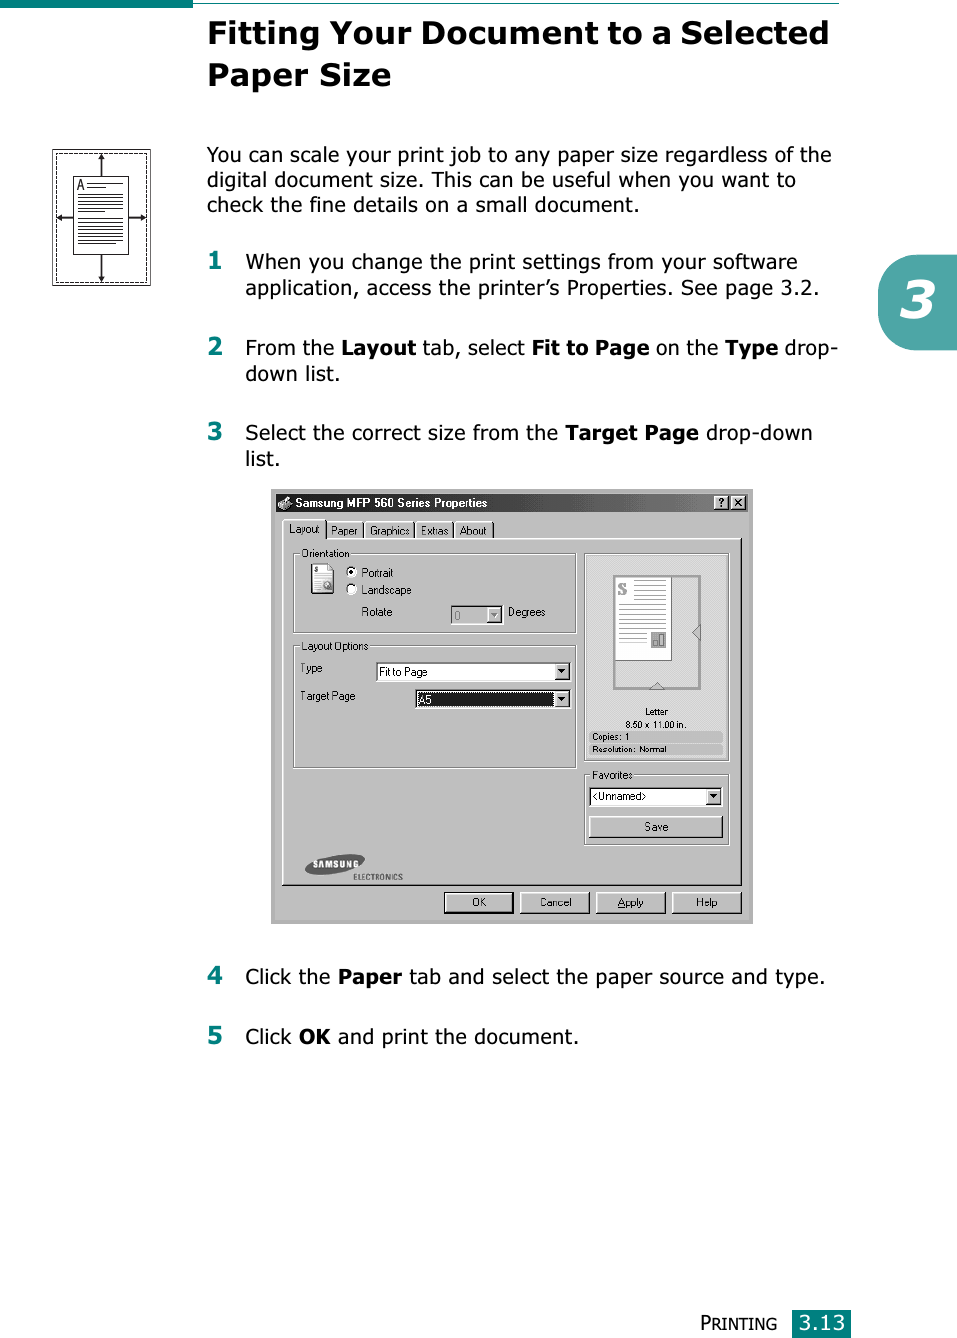 PRINTING3.133Fitting Your Document to a Selected Paper SizeYou can scale your print job to any paper size regardless of the digital document size. This can be useful when you want to check the fine details on a small document. 1When you change the print settings from your software application, access the printer’s Properties. See page 3.2.2From the Layout tab, select Fit to Page on the Type drop-down list. 3Select the correct size from the Target Page drop-down list.4Click the Paper tab and select the paper source and type.5Click OK and print the document. A